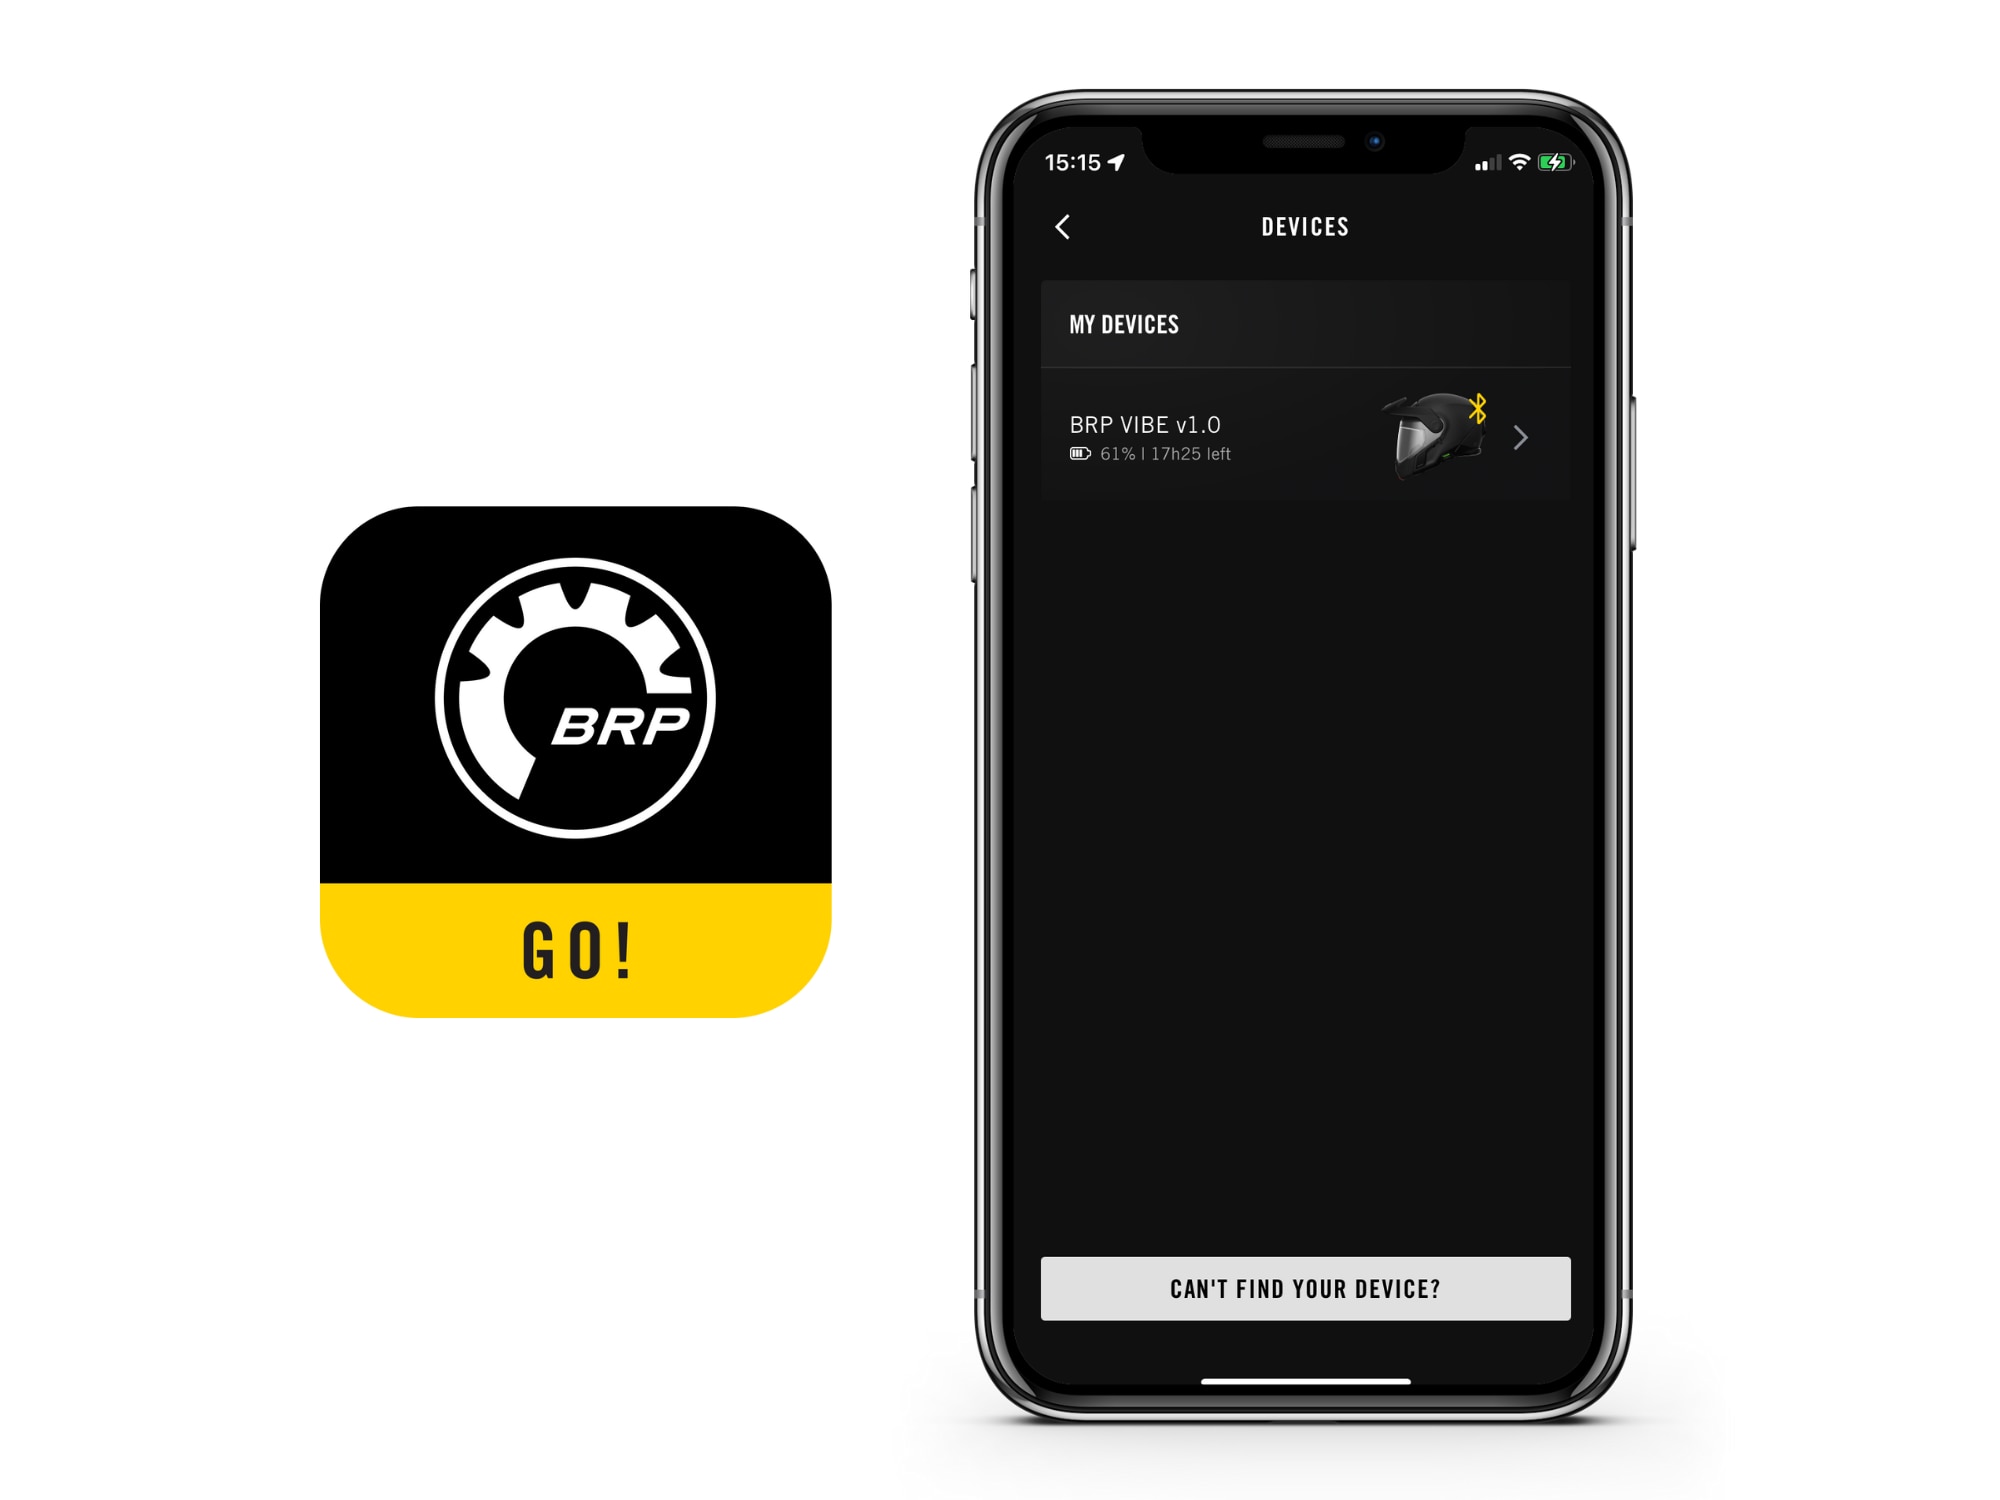 The BRP GO! app showing the Vibe device screen for language management